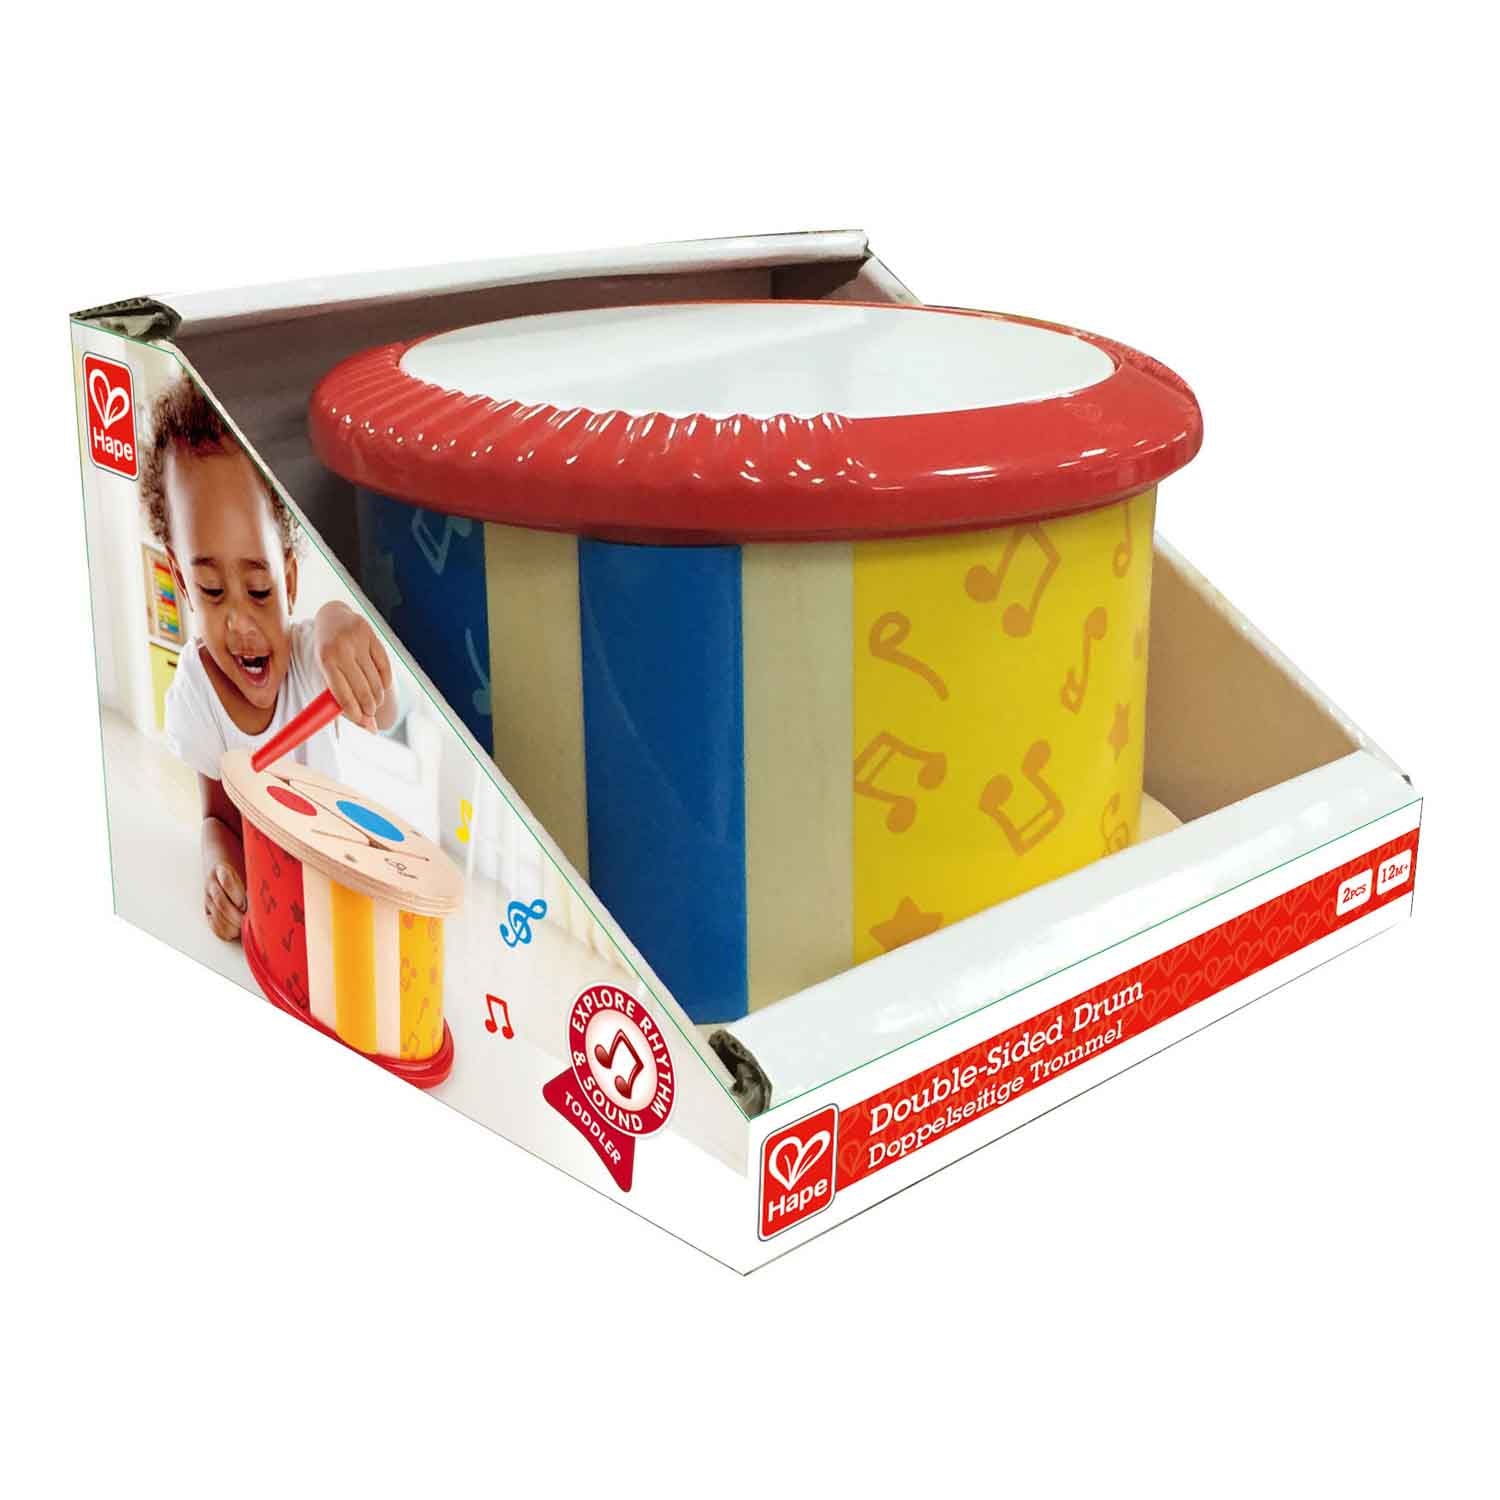 Hape: Double-Sided Drum